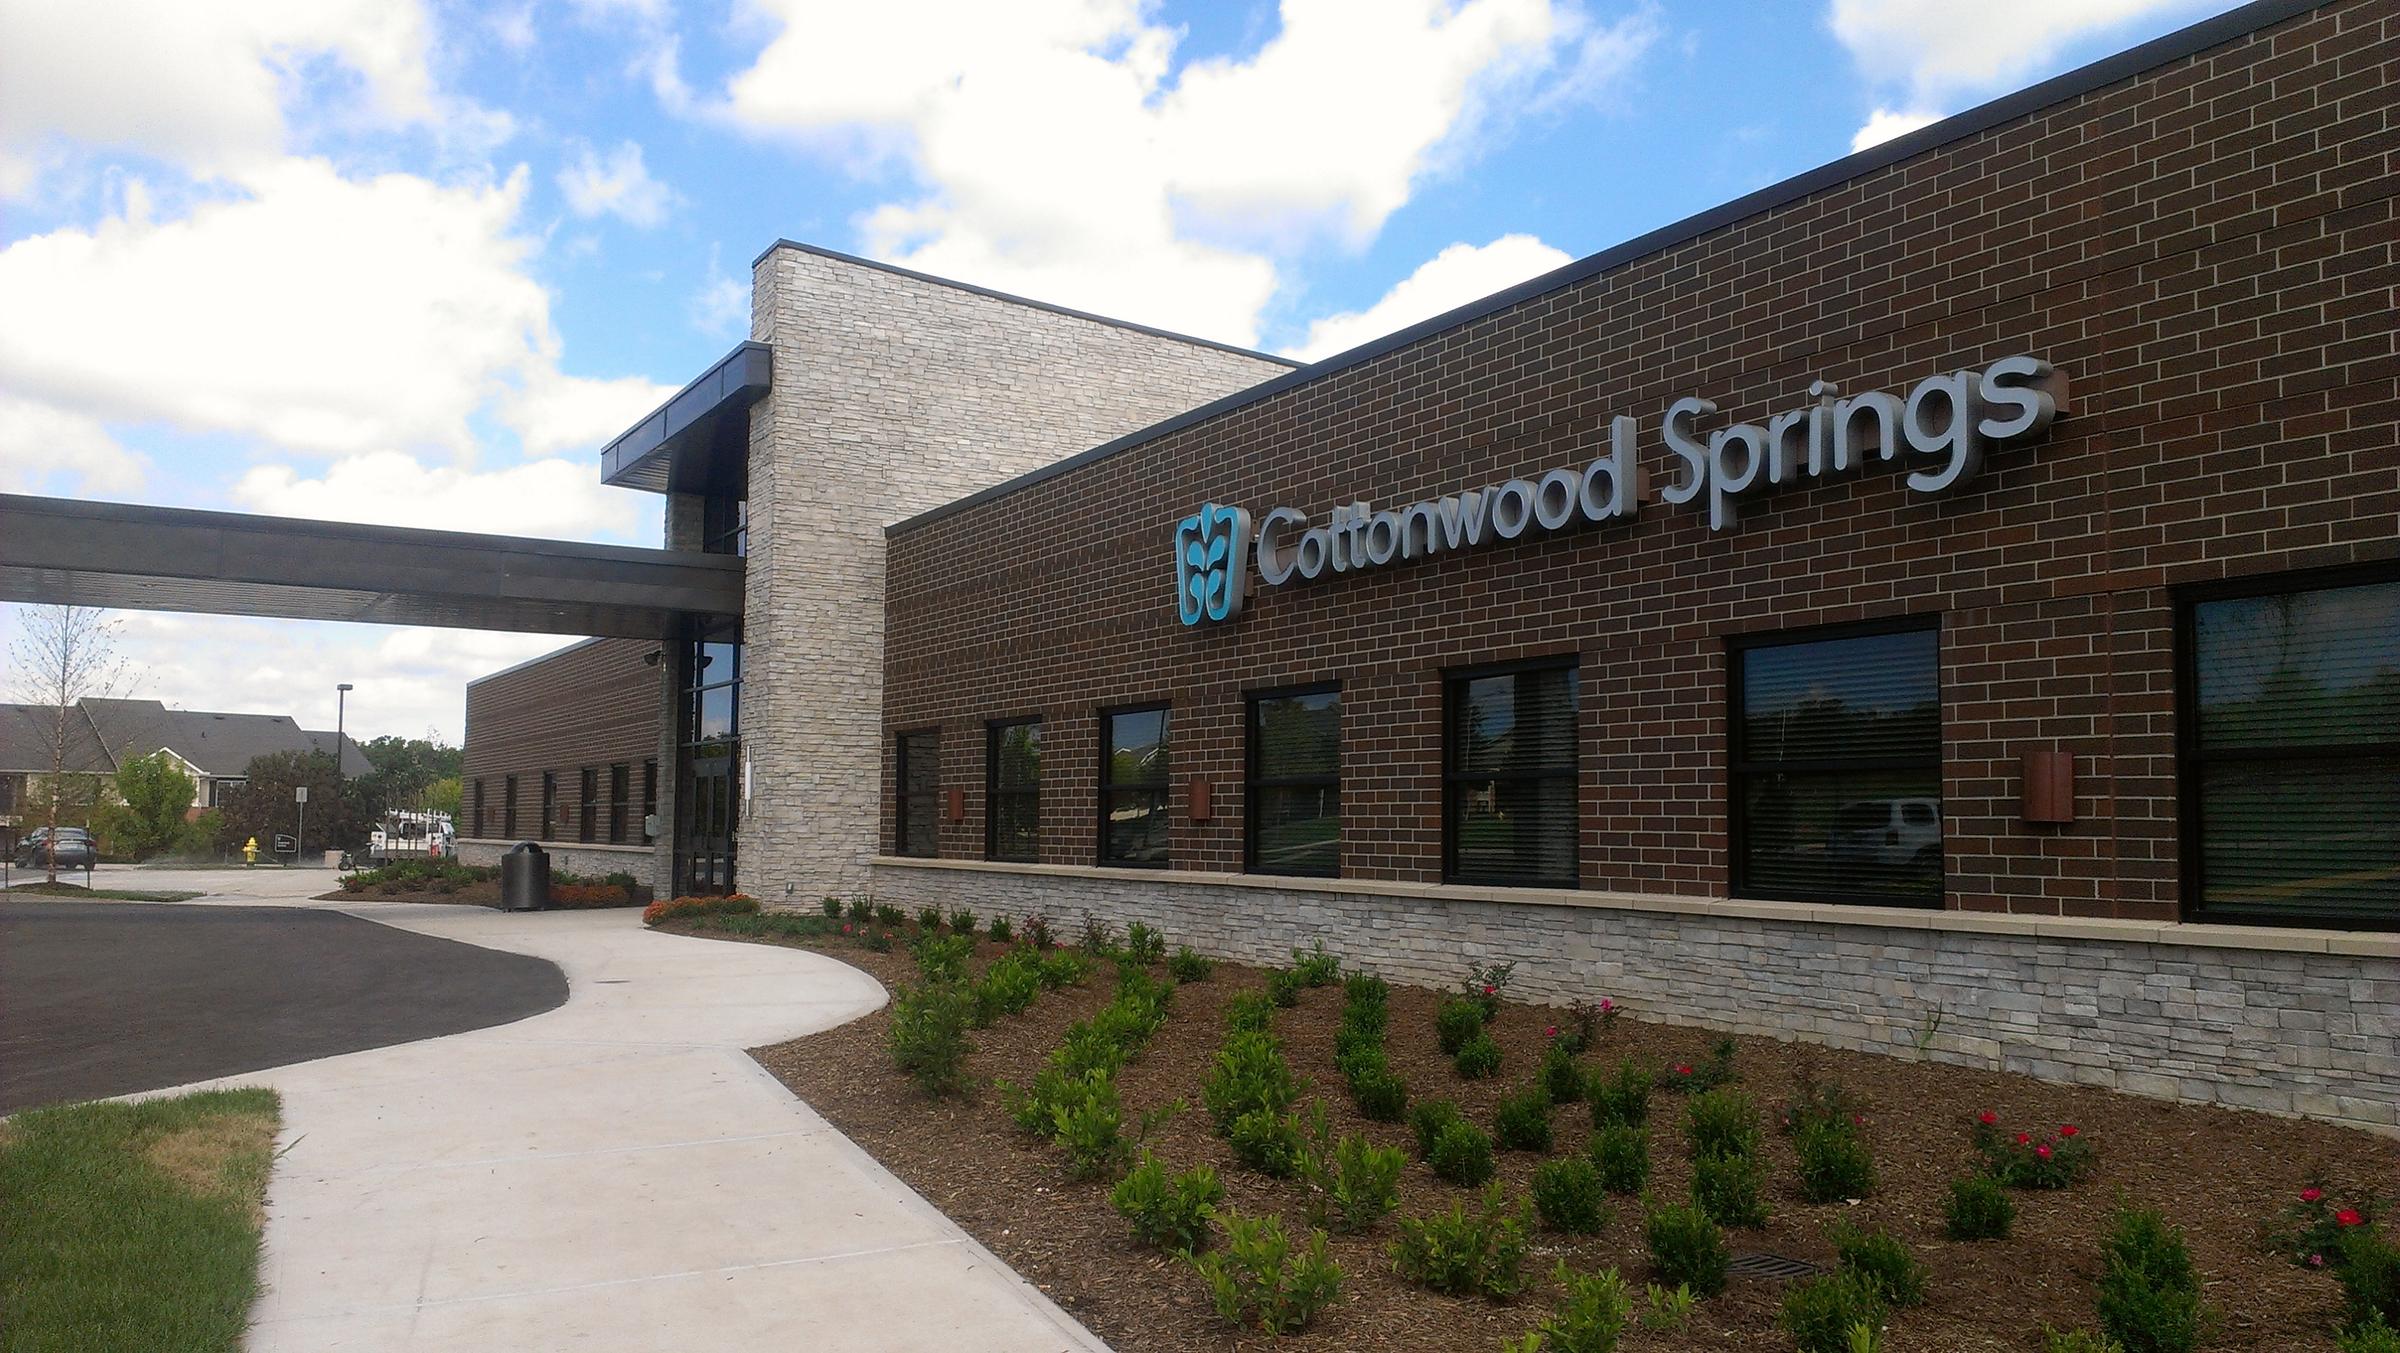 Cottonwood Springs Hospital, a 72-bed behavioral health facility, opens this week in Olathe. (Photo: Maria Carter | KCUR)